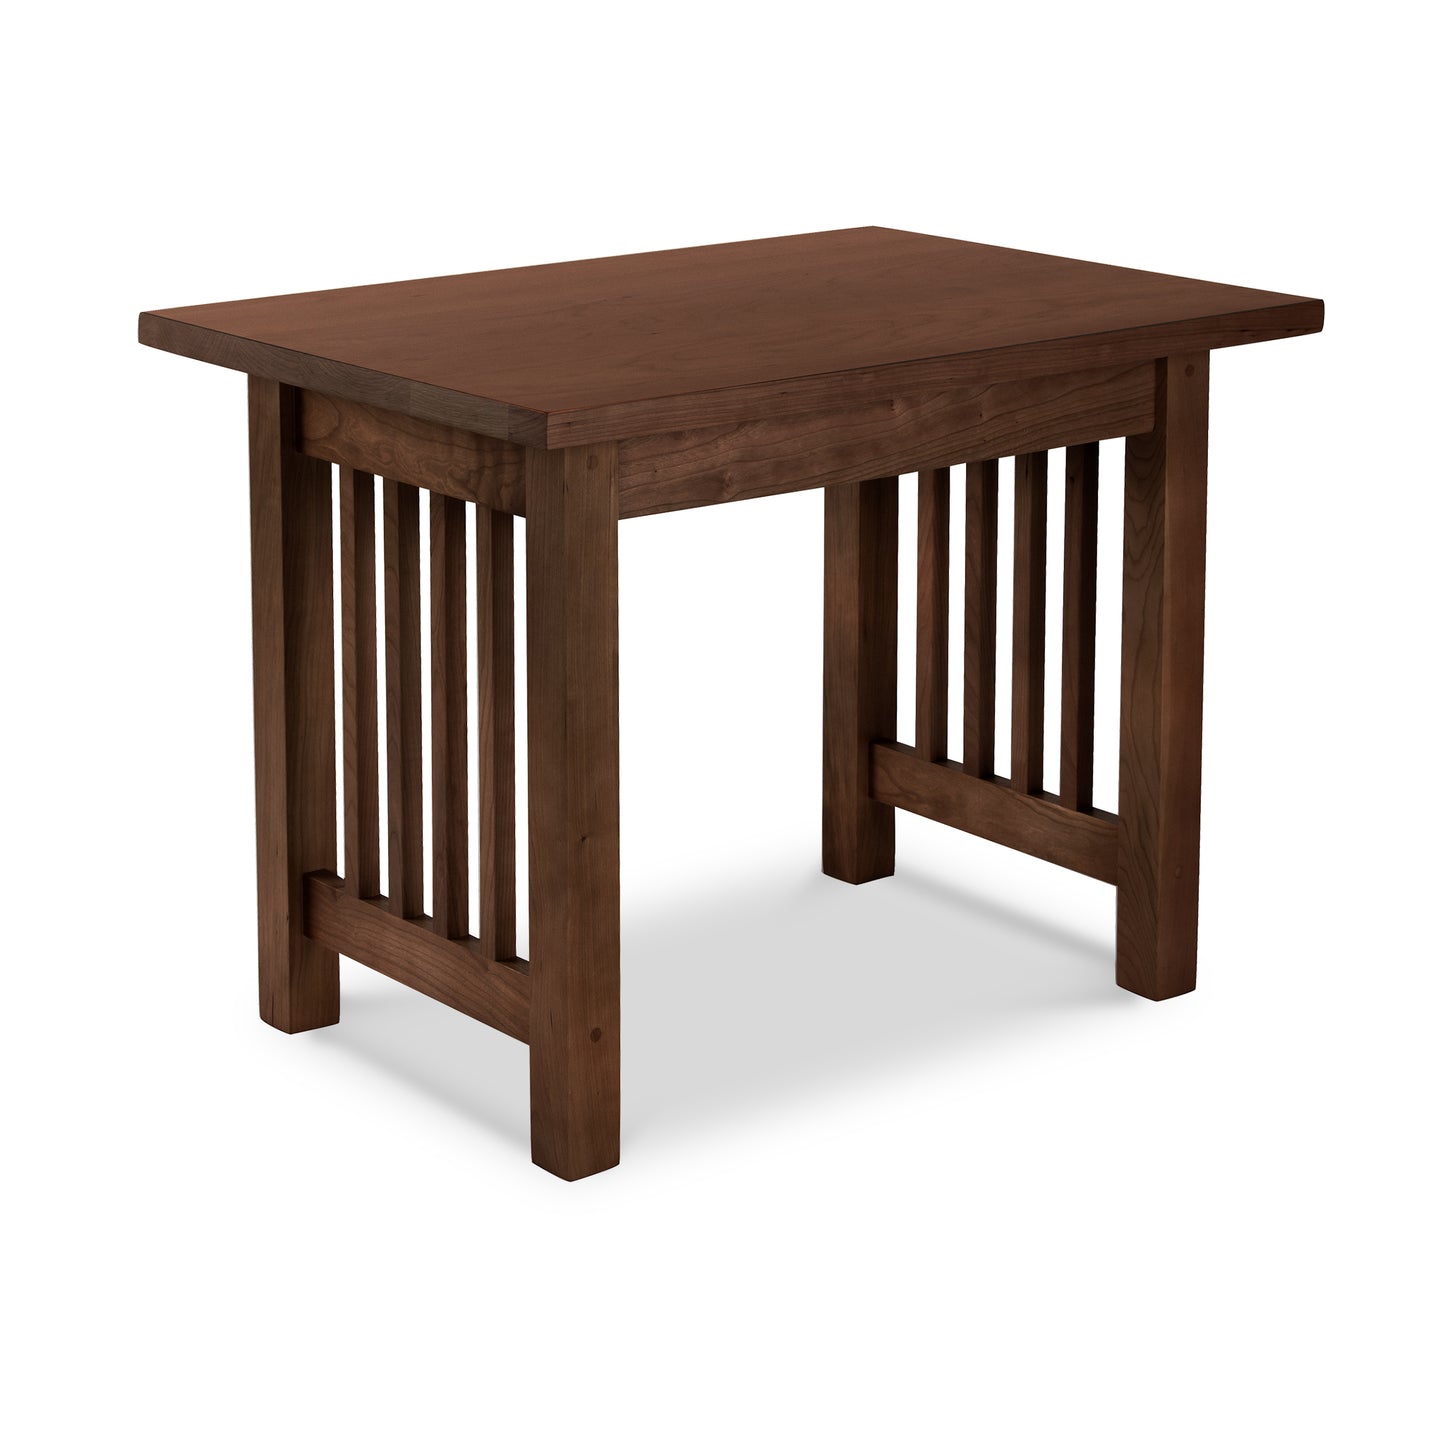 A Lyndon Furniture American Mission End Table, handmade in Vermont, with a wooden top in Mission style.